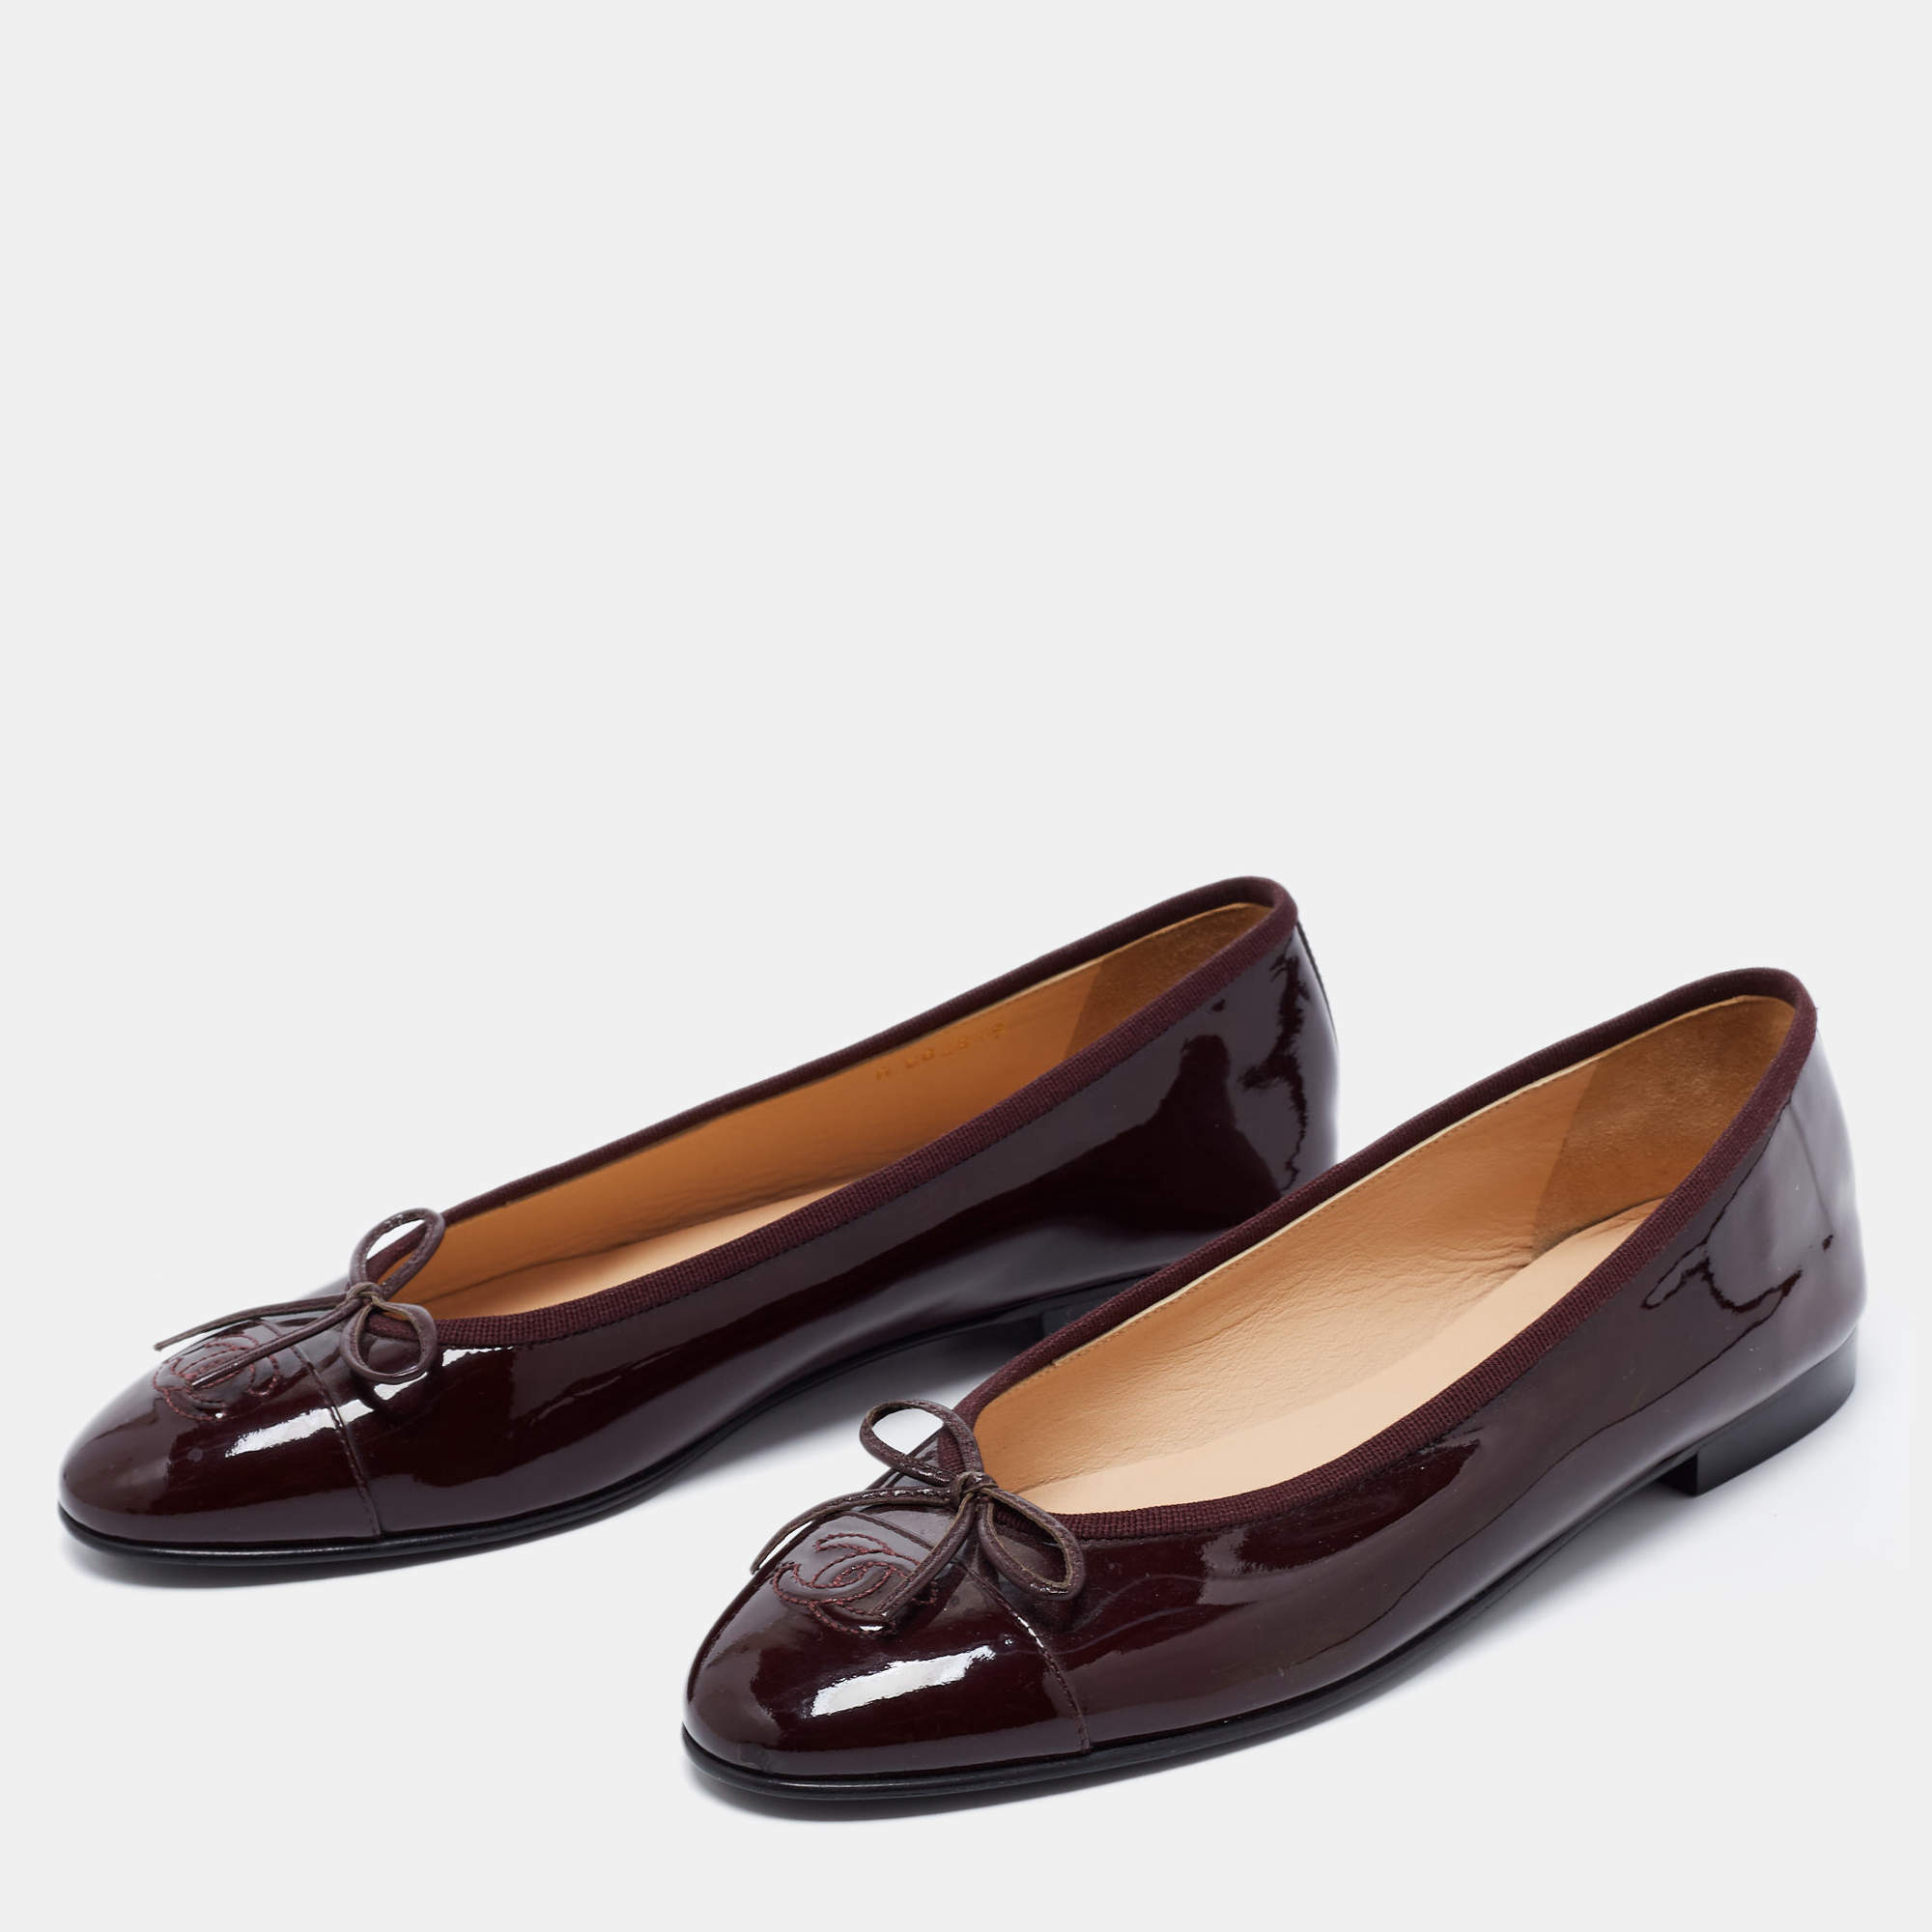 Chanel Burgundy Patent Leather CC Ballet Flats Size 39.5 Chanel